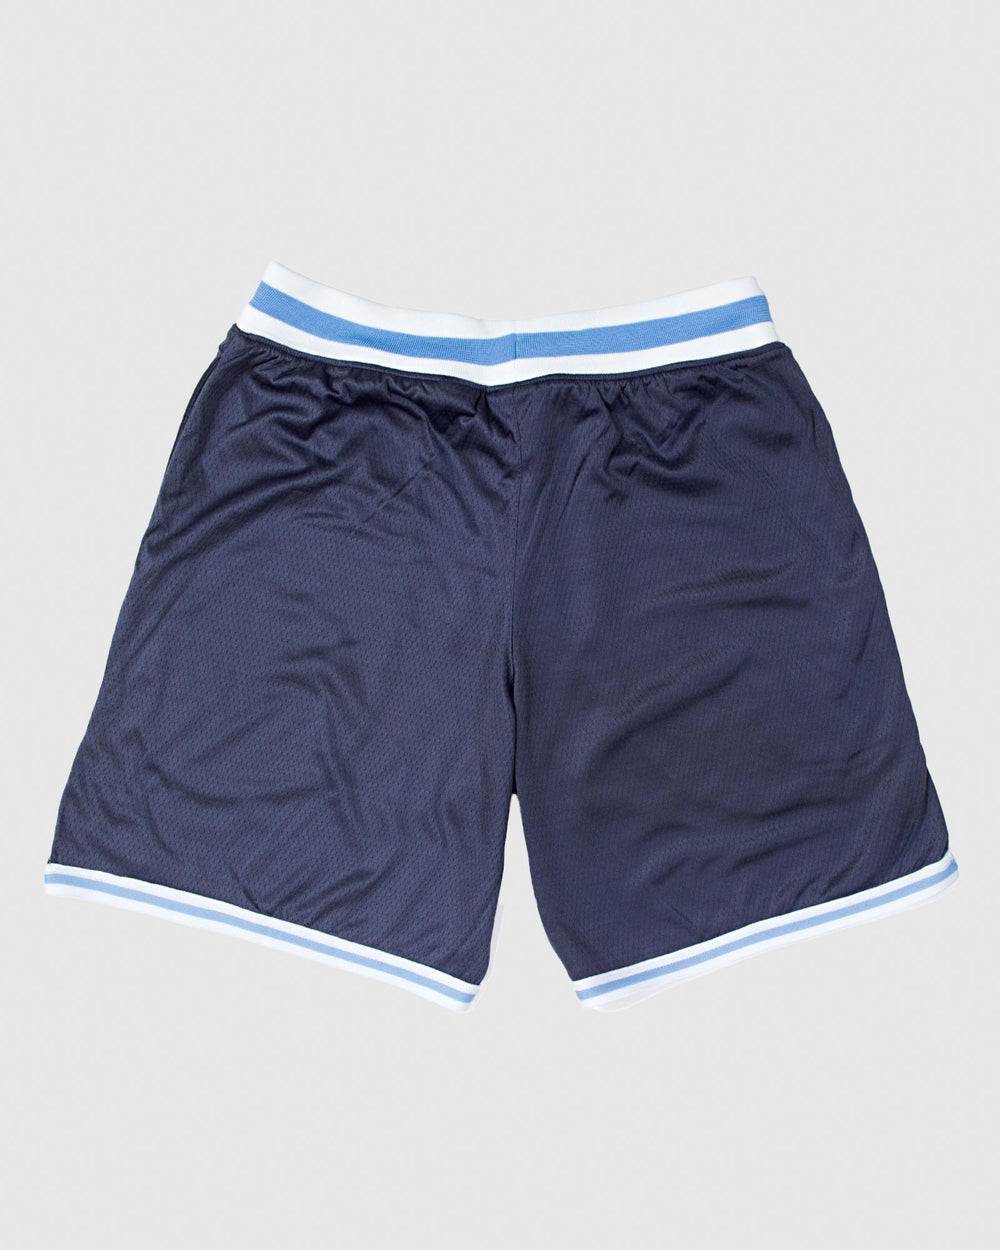 Back of navy mesh shorts with blue and white waistband#color_navy